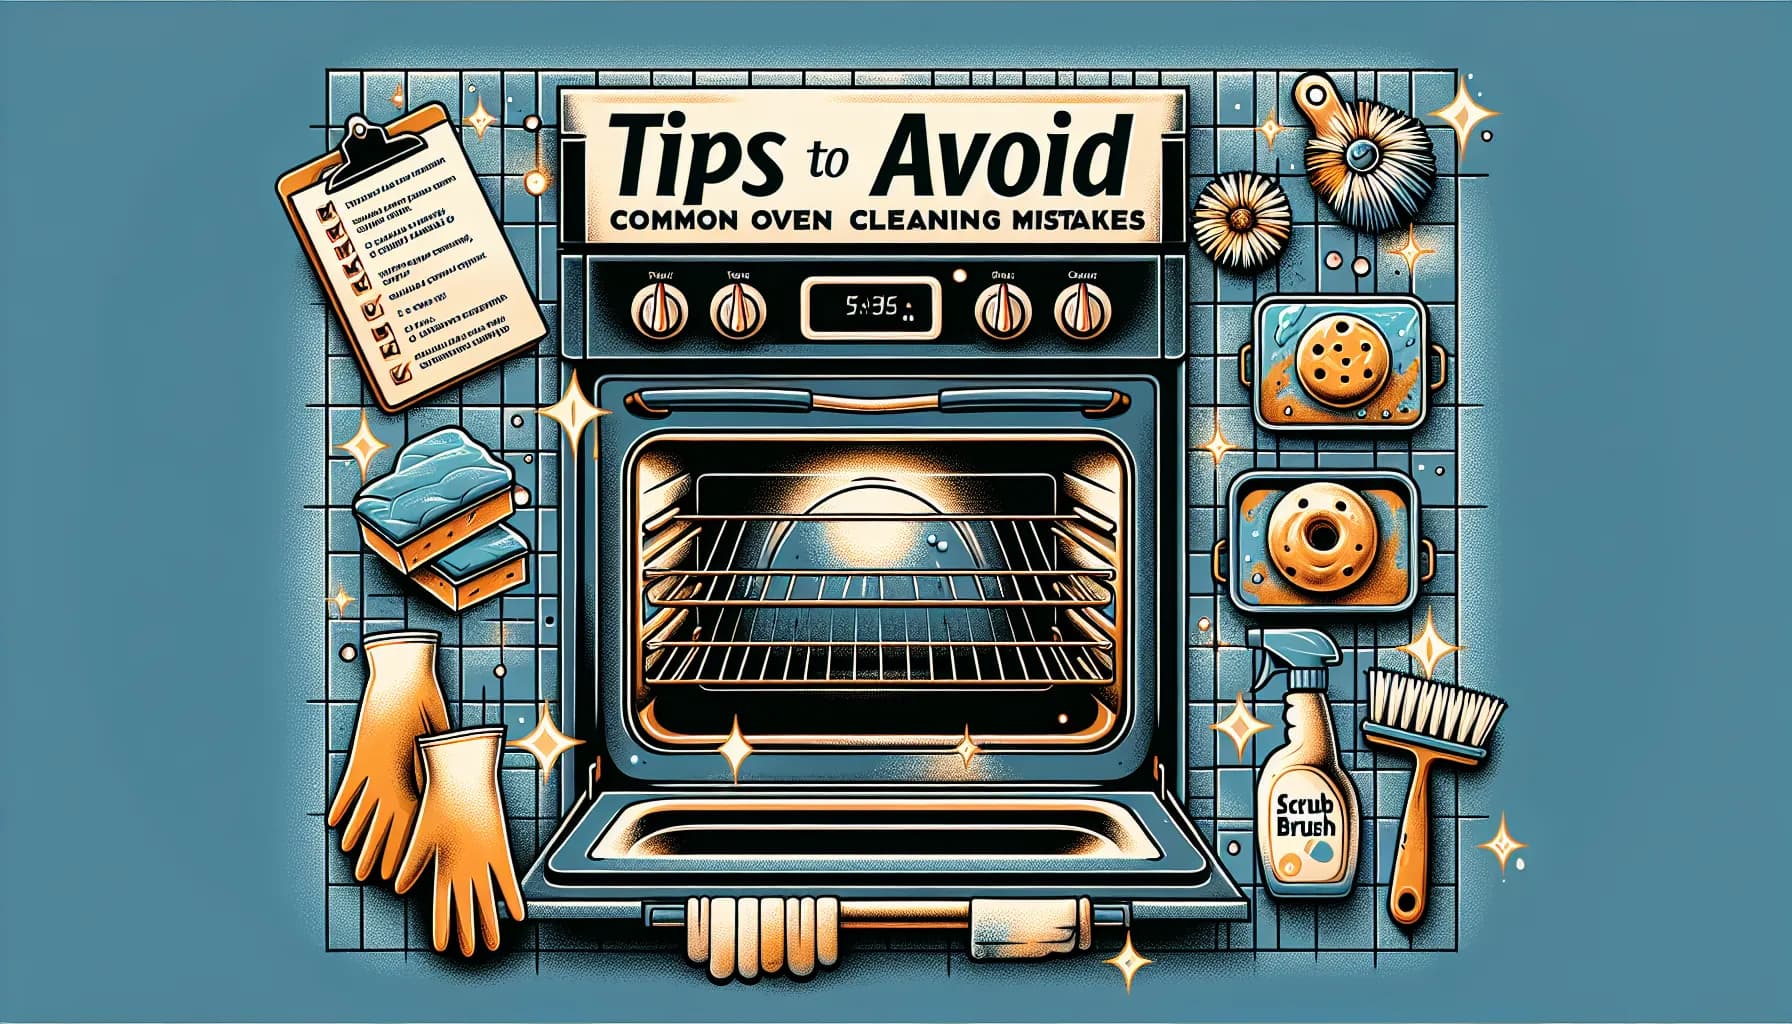 Clean oven surrounded by checklist, scrub brush, and gloves, highlighting tips to avoid oven cleaning mistakes.